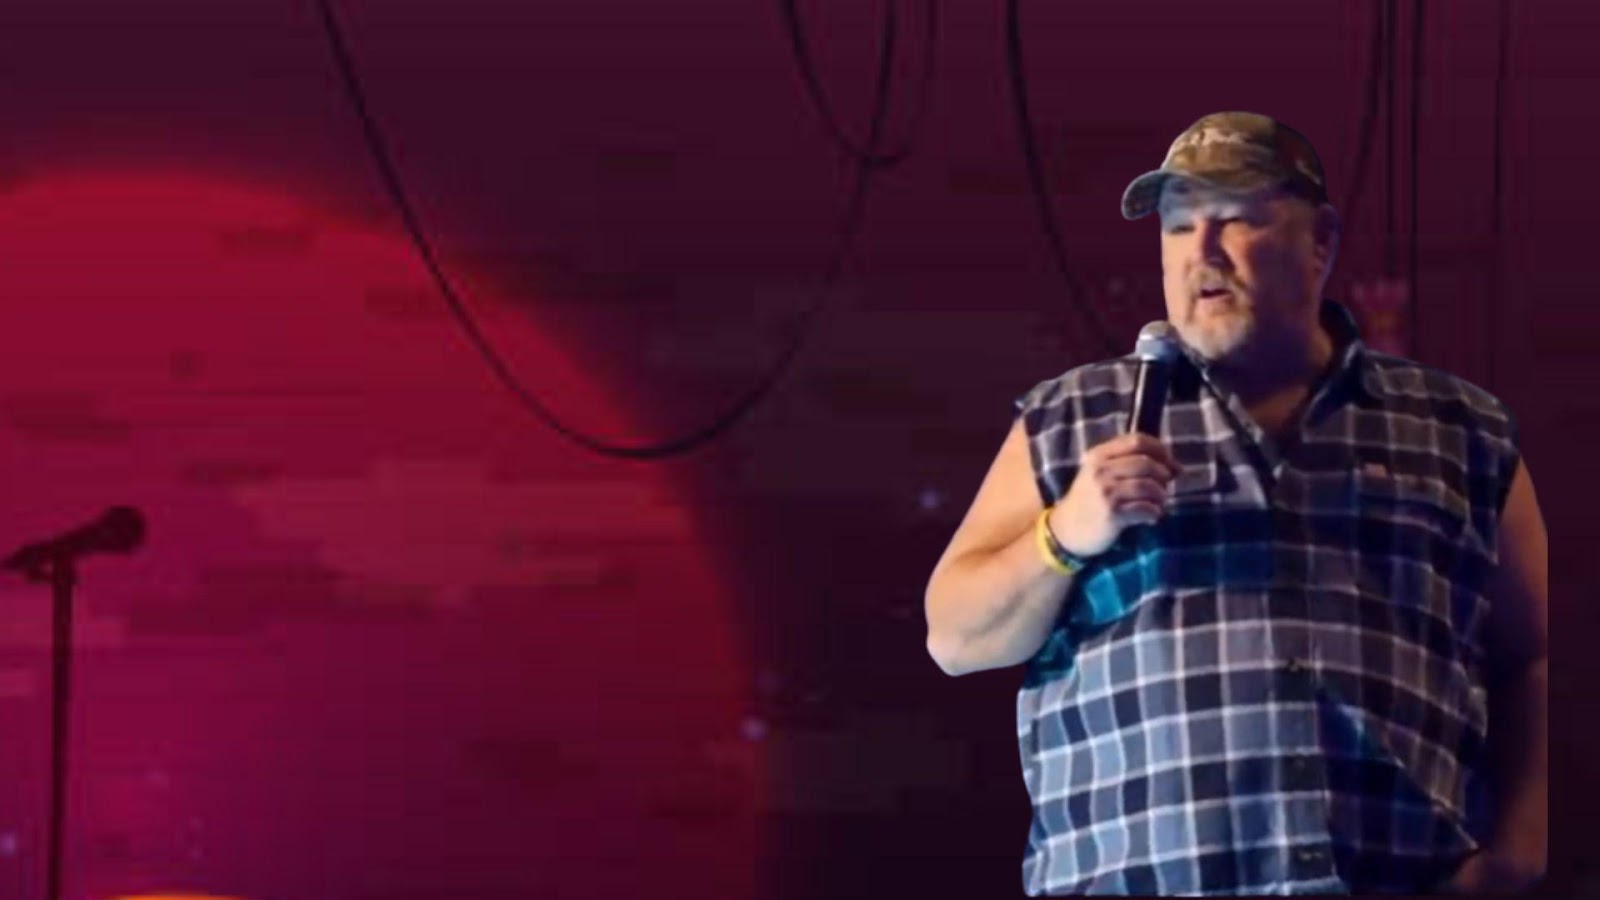 Live performances of Larry the cable guy